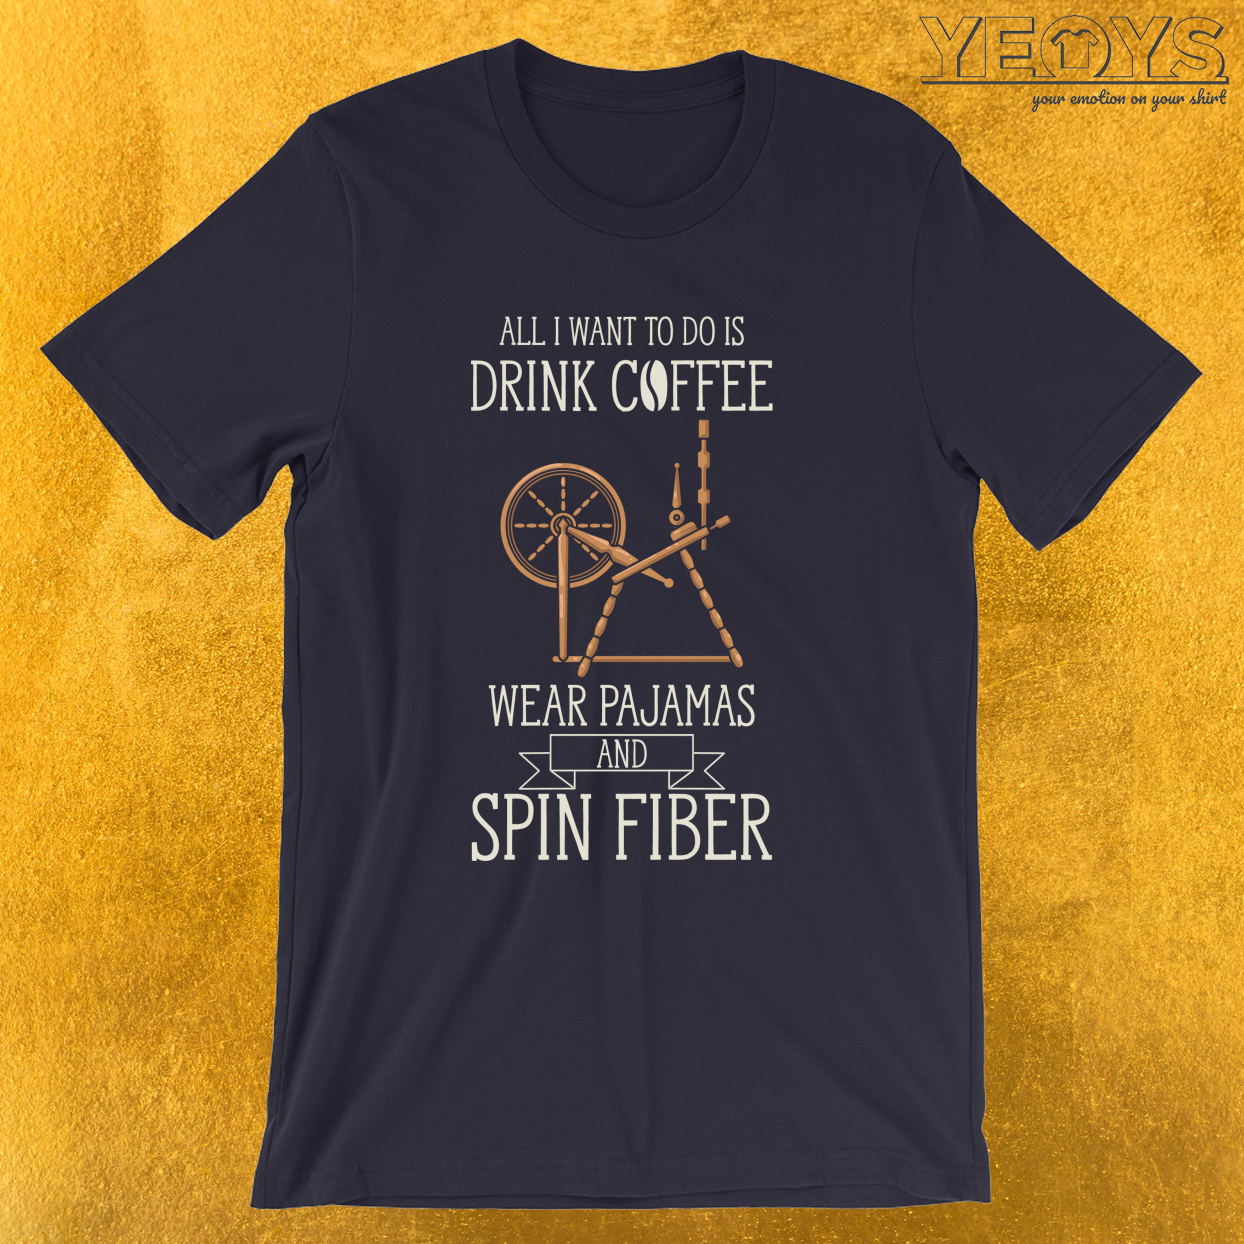 All I Want Is To Drink Coffee And Spin Fiber – Hand Spinning Tee